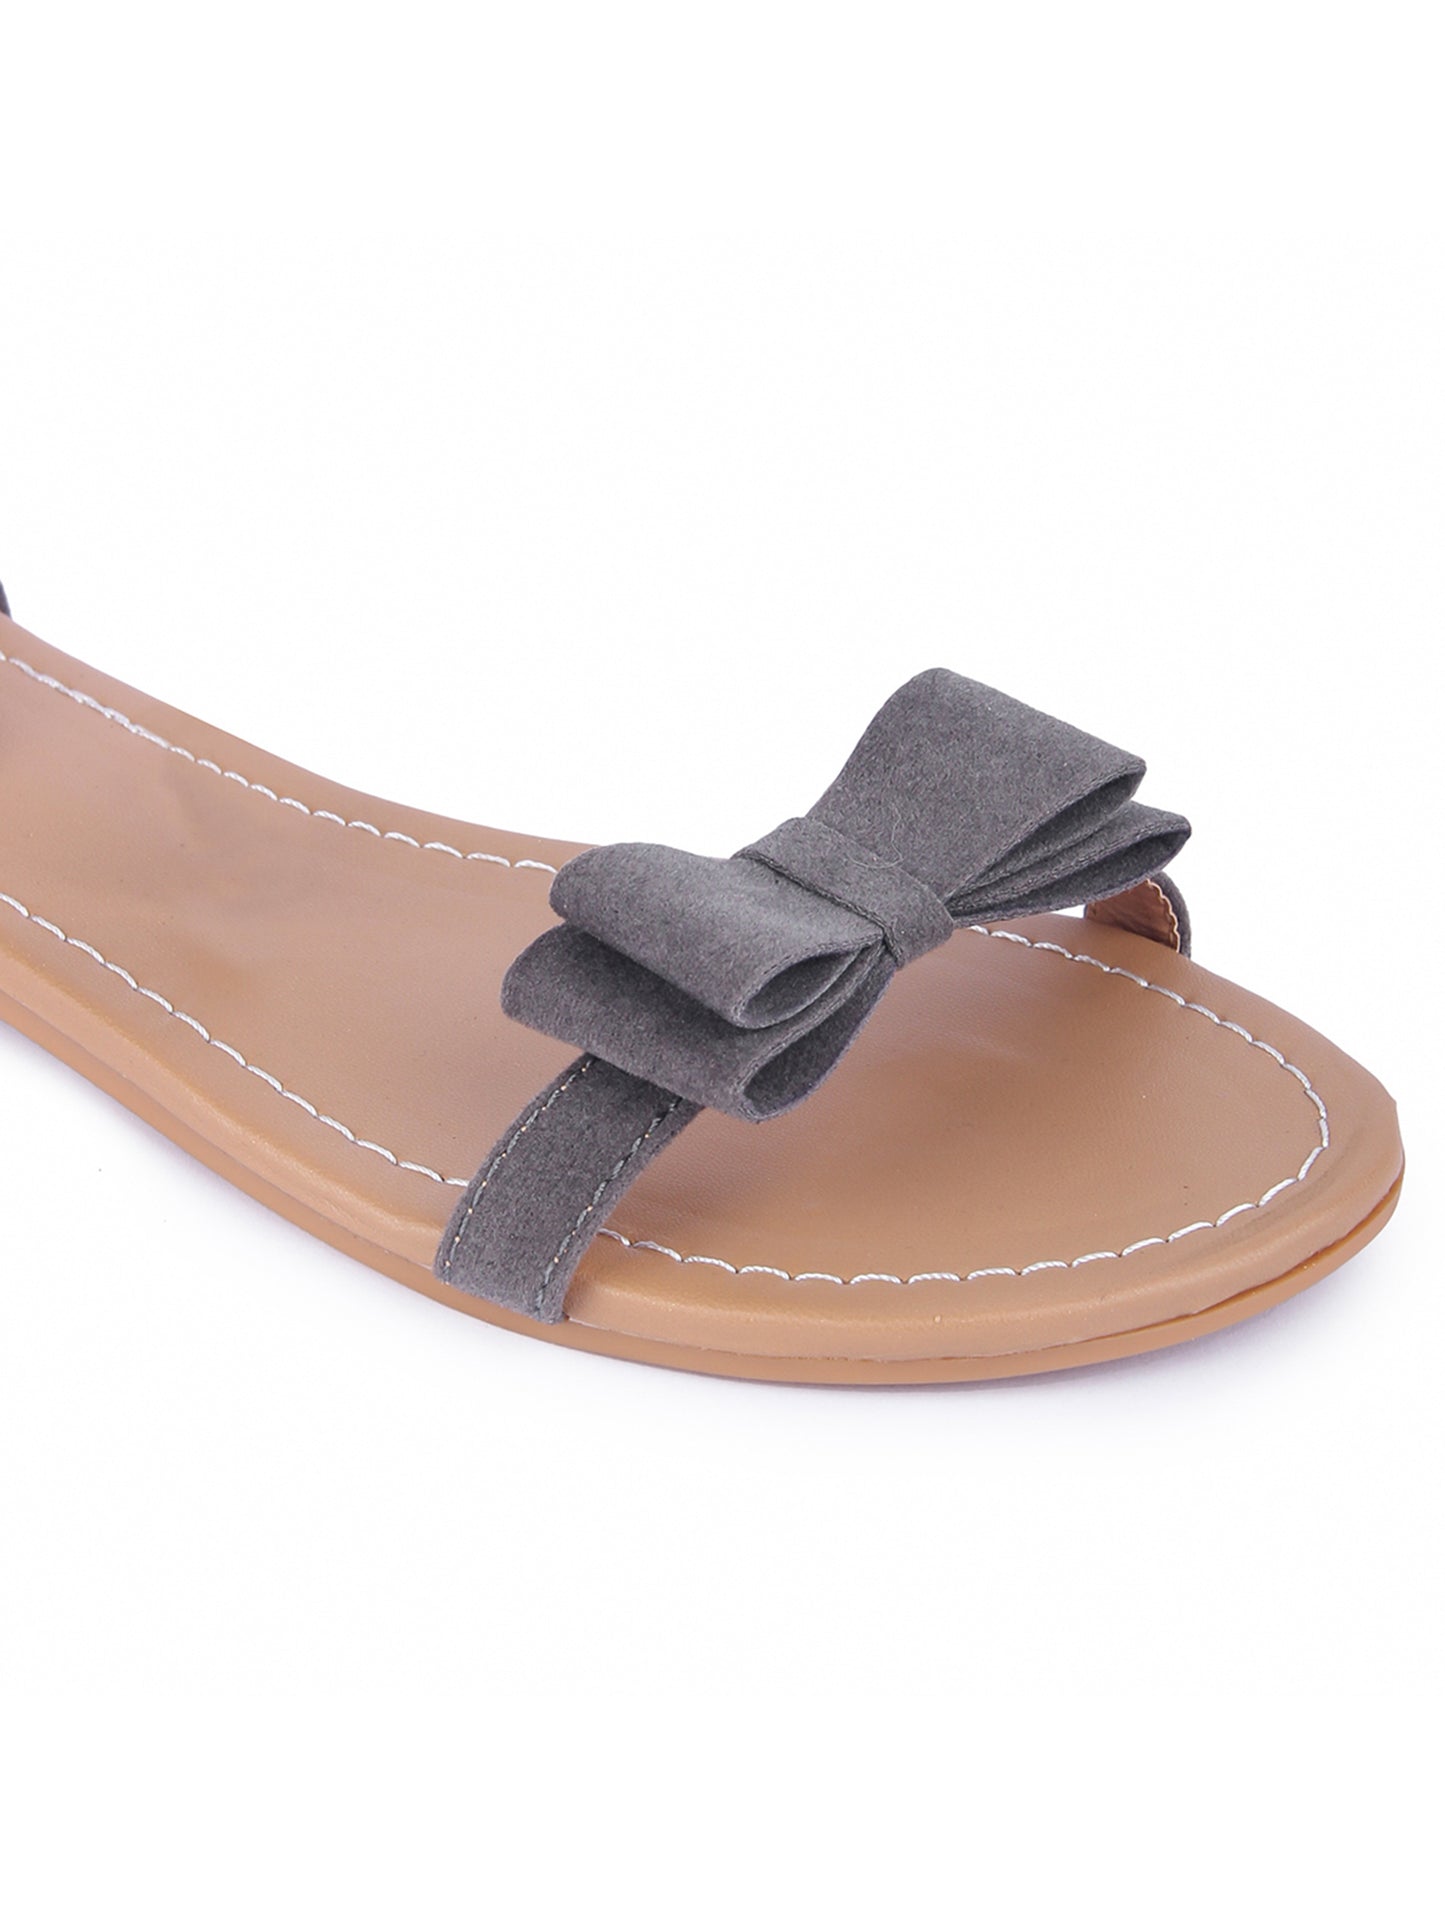 Women Grey Suede Bow Tie Up Fashion Sandal